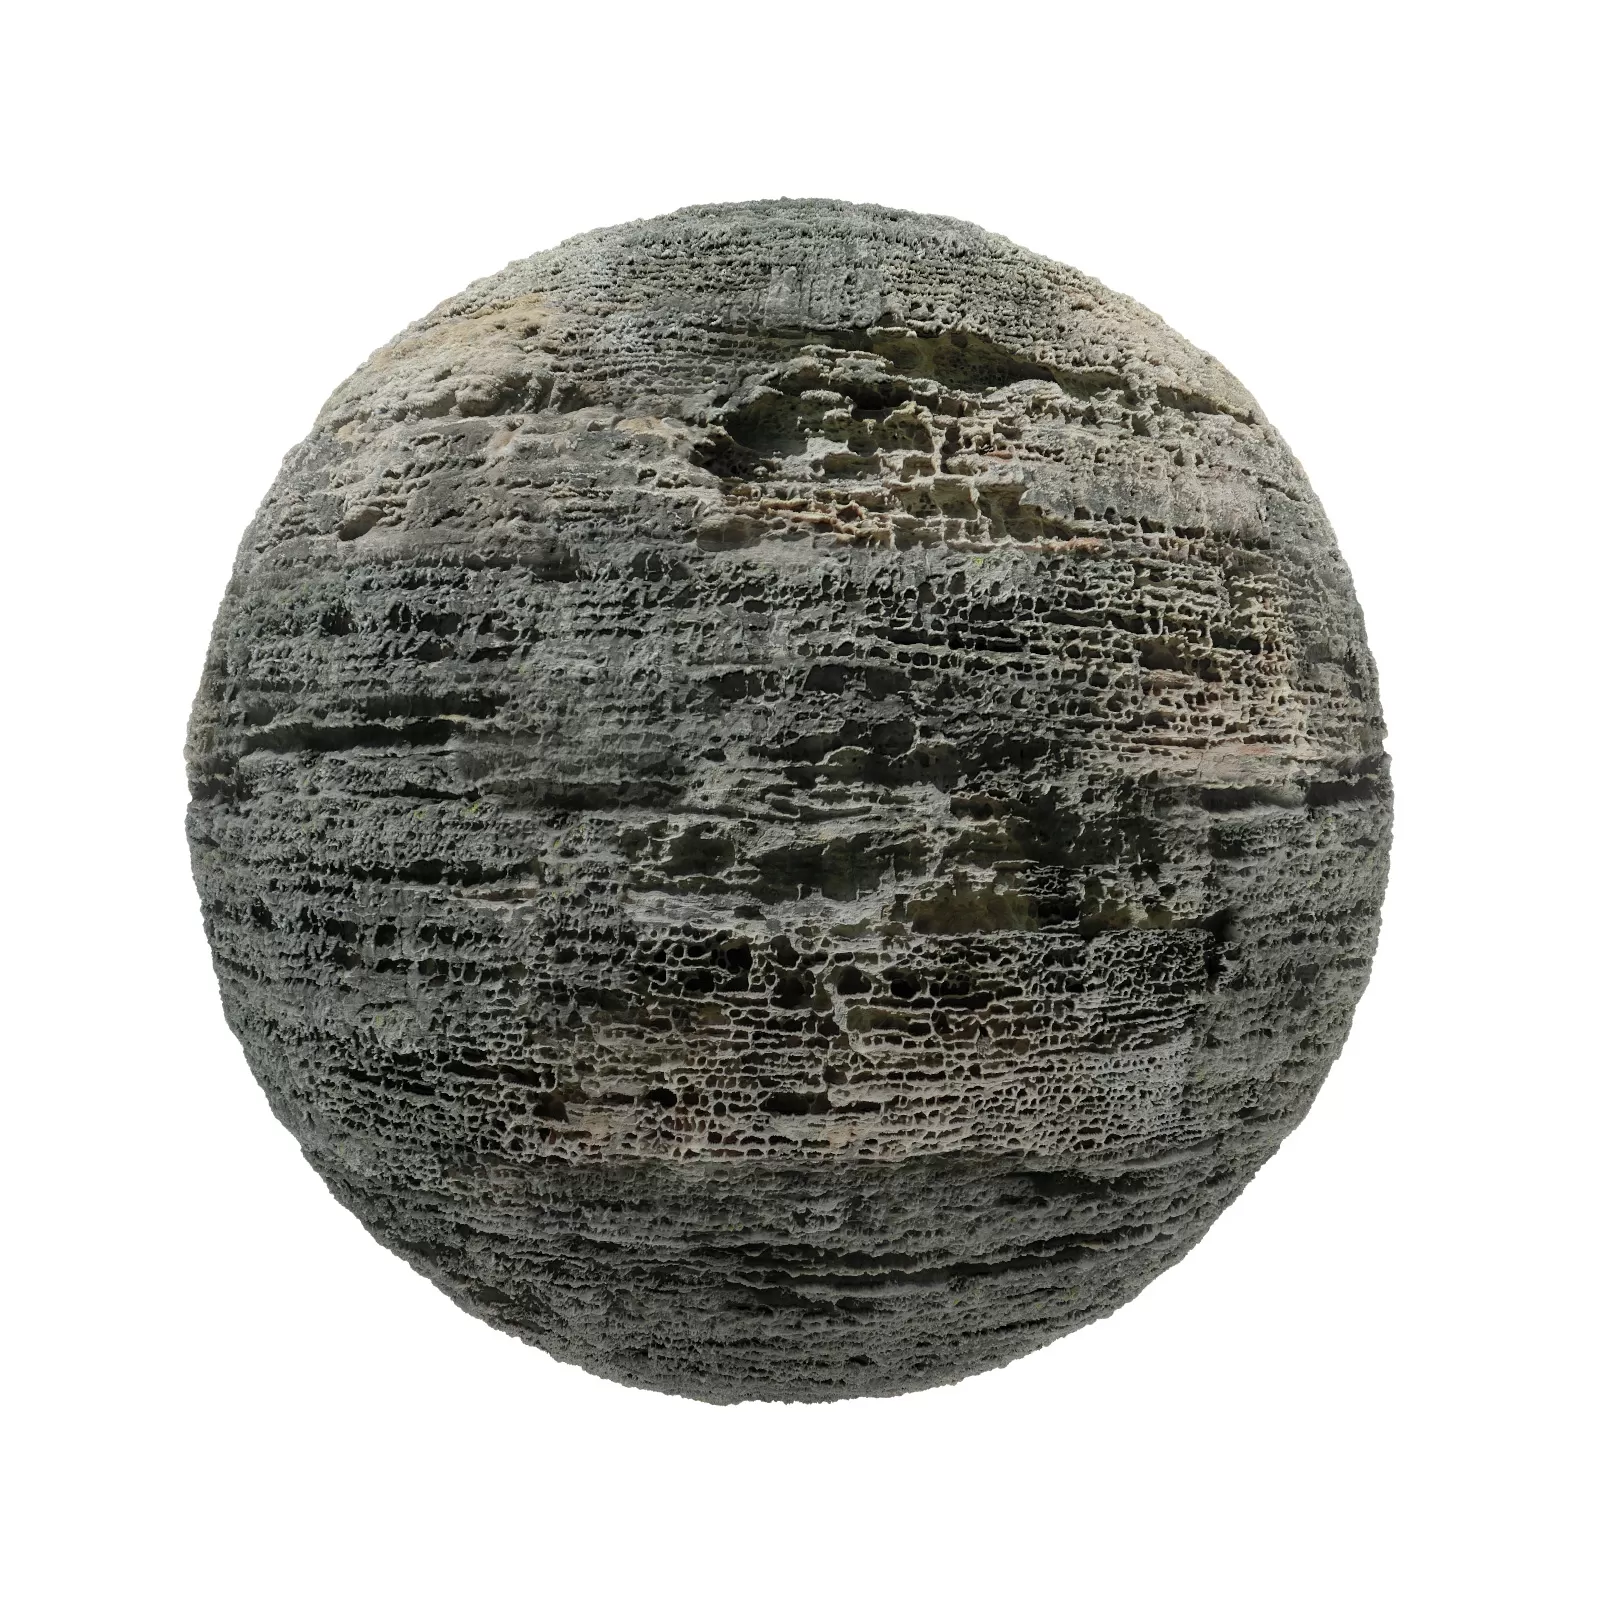 TEXTURES – STONES – CGAxis PBR Colection Vol 1 Stones – rough cliff wall